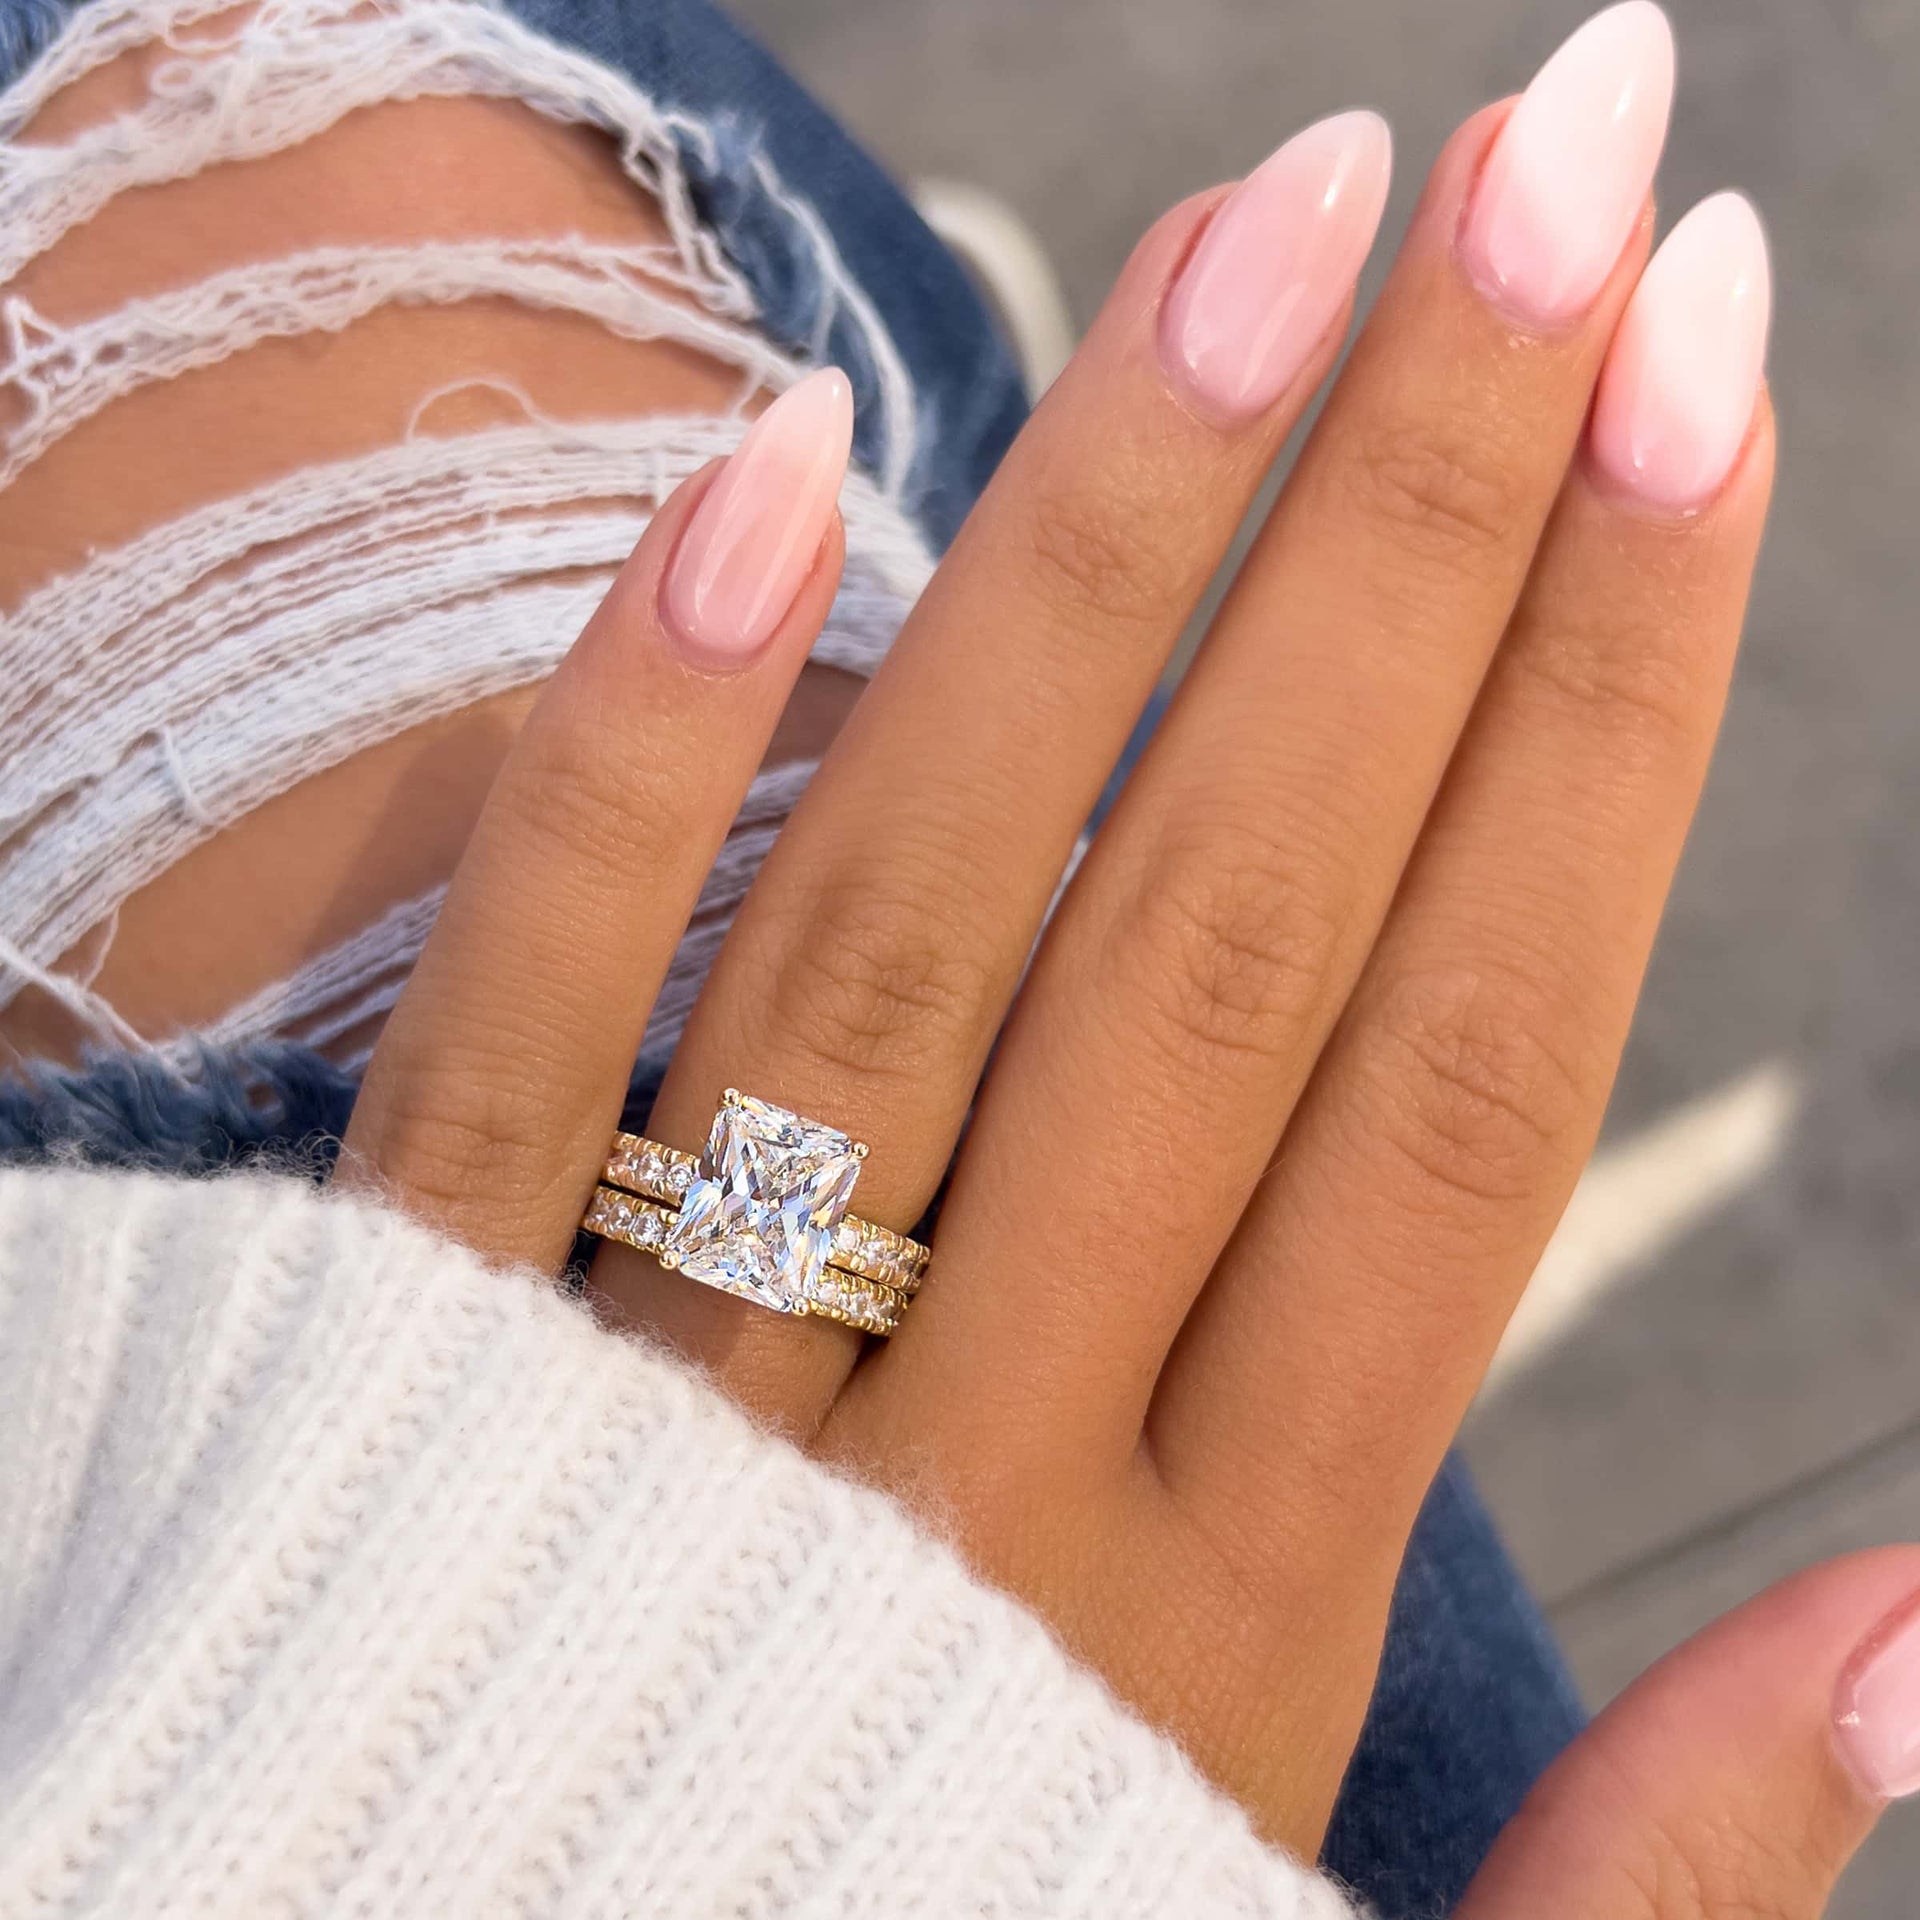 3.75 radiant cut engagement ring paired with gold eternity wedding band worn on model's hand with ripped jeans